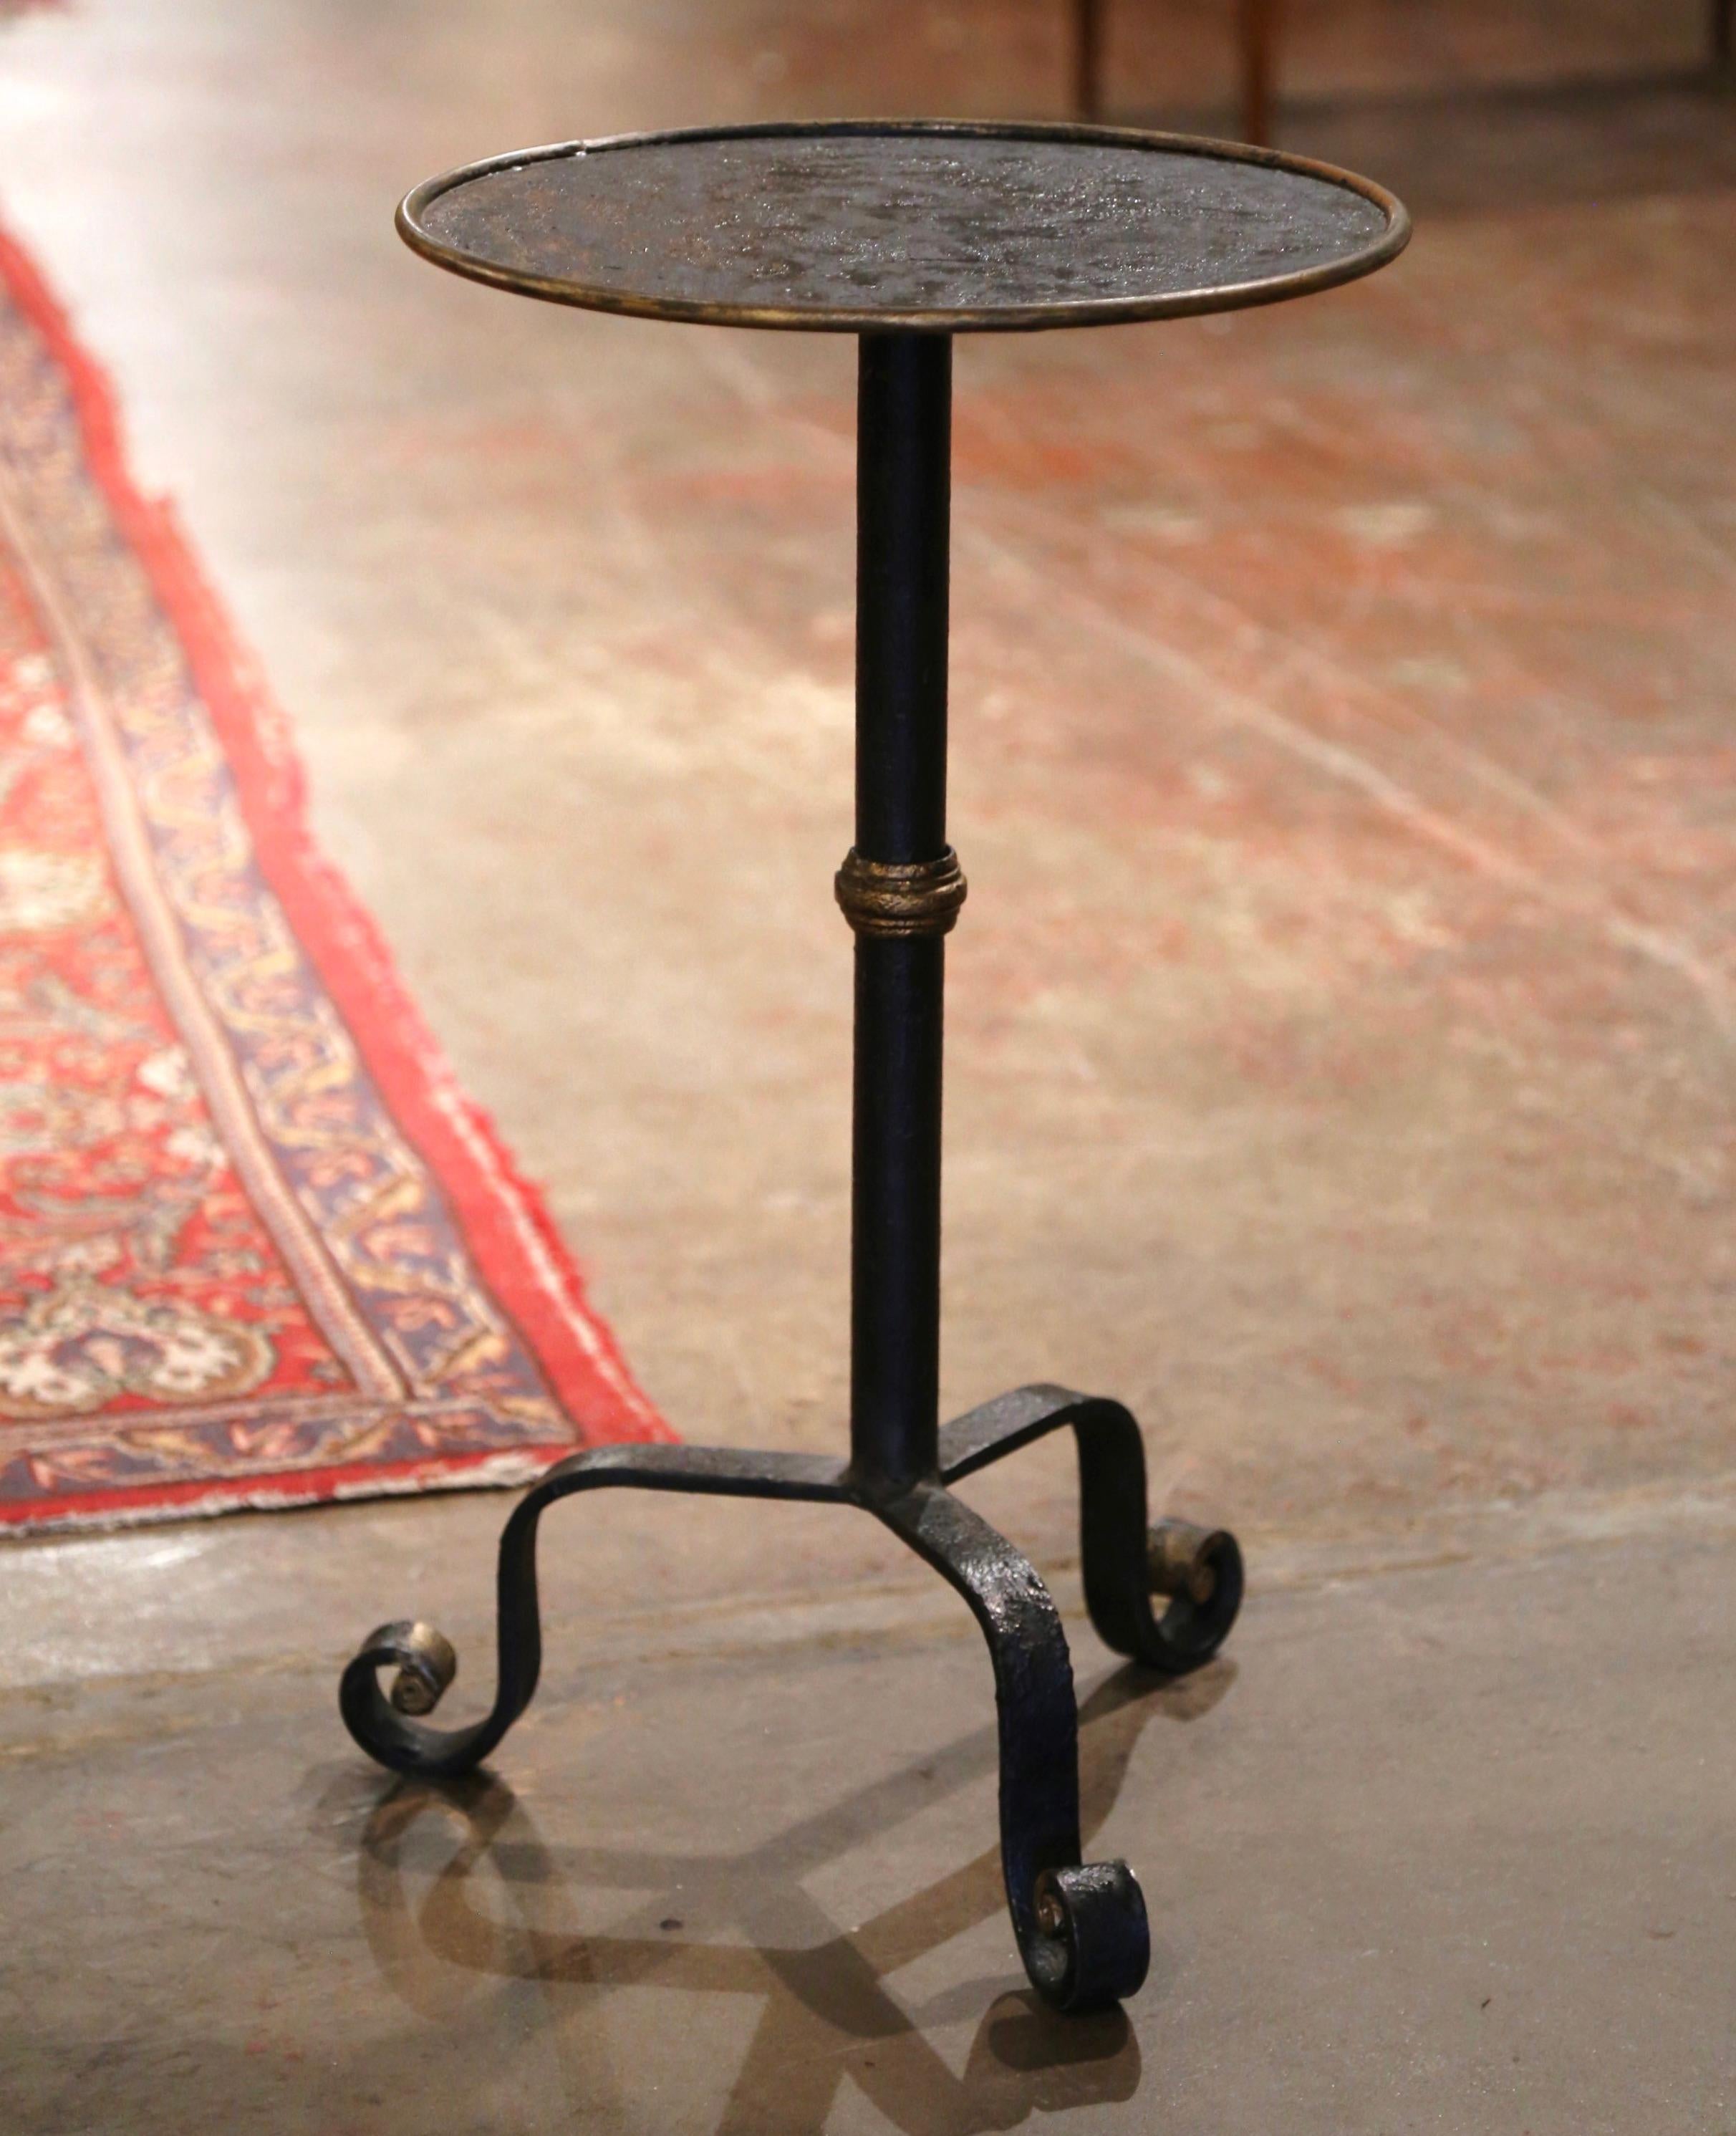 This elegant, antique pedestal table was crafted in Southern France, circa 1880. The martini table features a thick central turned pedestal stem over three curved legs ending with small scroll feet. The serving table is topped with a round surface